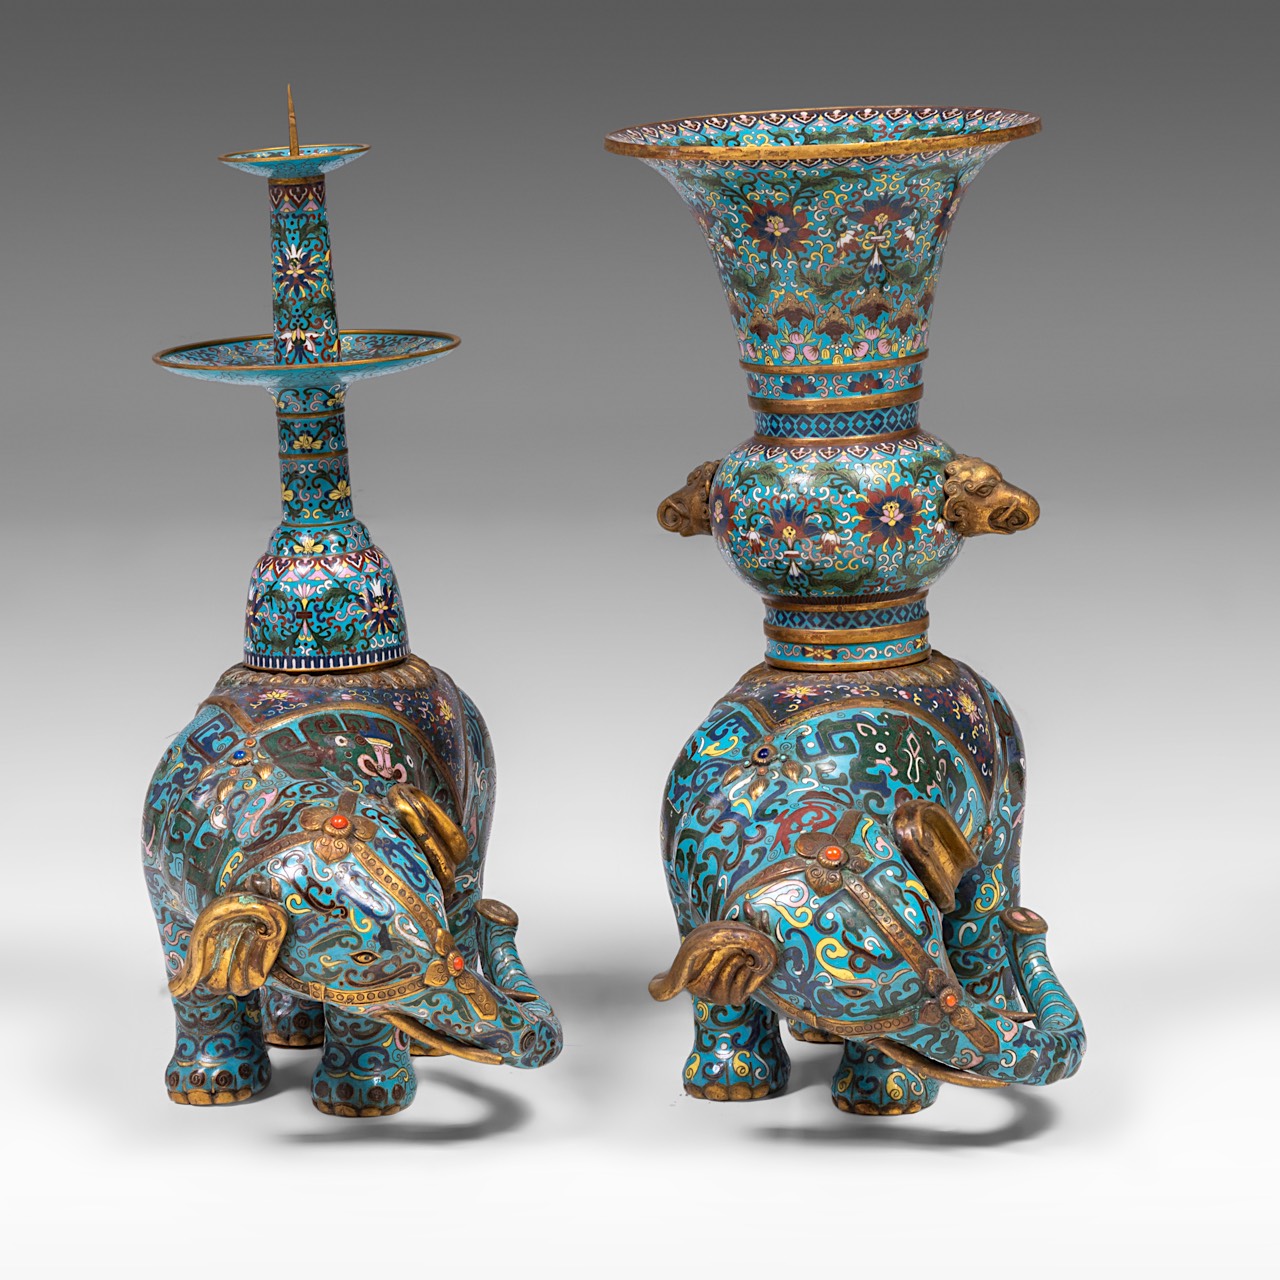 A Chinese five-piece semi-precious stone inlaid cloisonne garniture, late Qing/20thC, tallest H 58 - - Image 21 of 24